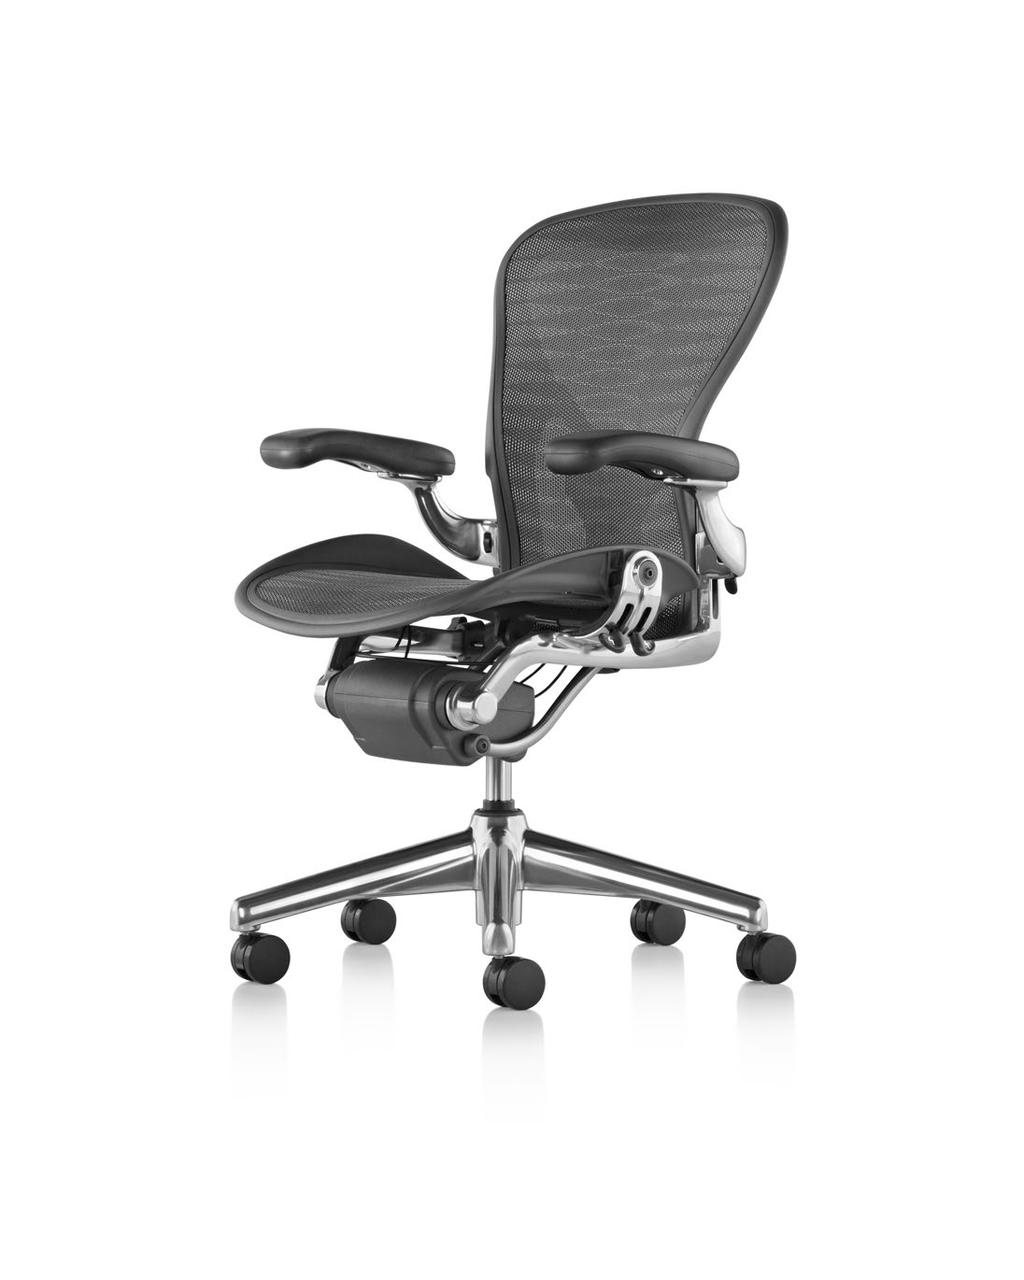 z Aeron Chairs Designers Bill Stumpf and Don Chadwick Every material, every mechanism on Aeron advances the art and science